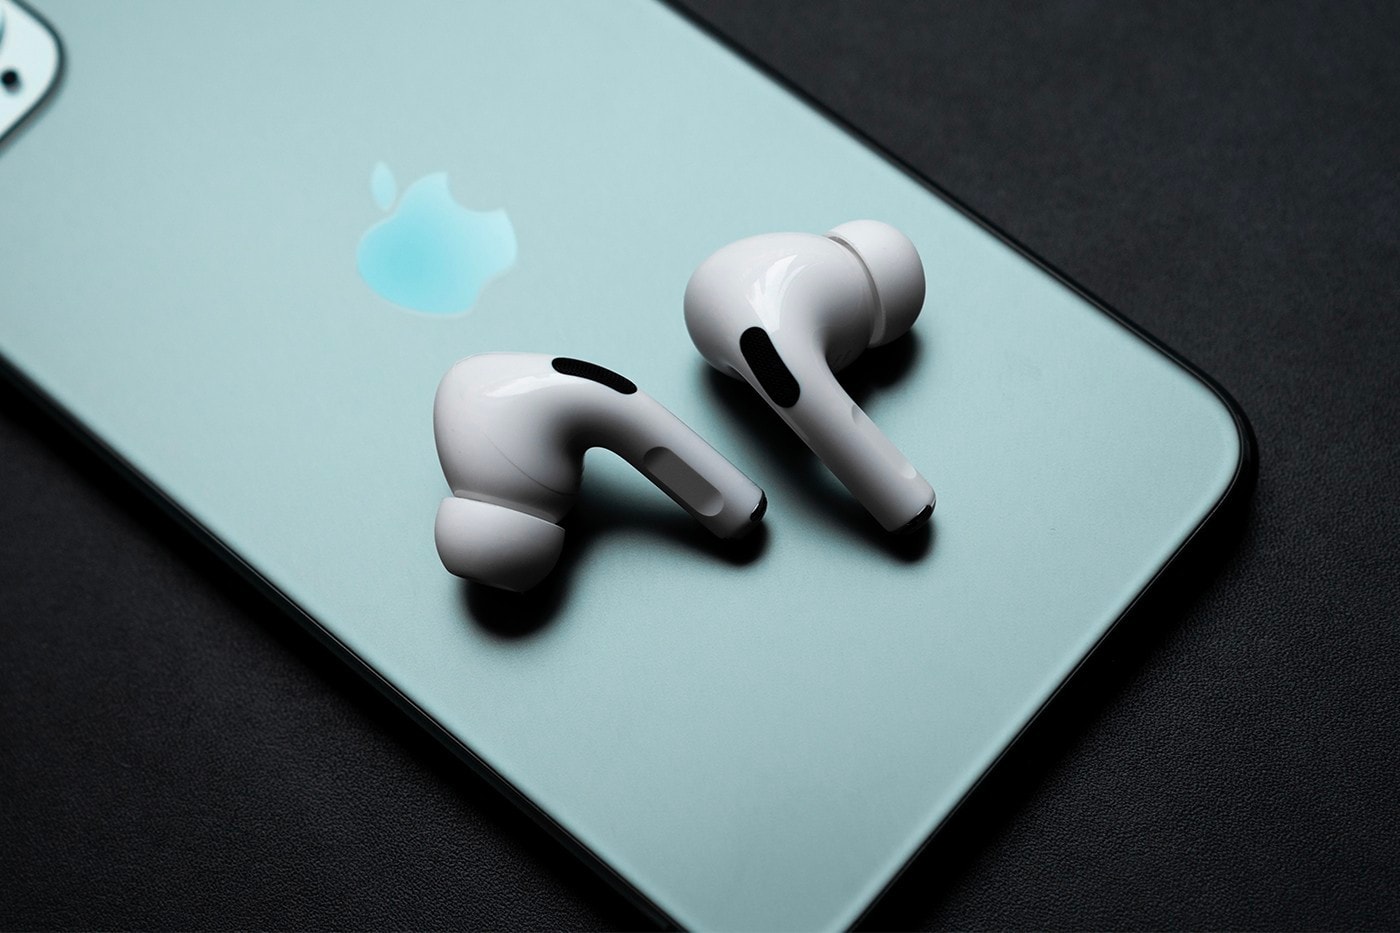 Morning Commute - Designer Apple Airpods Pro 2 Case Cover